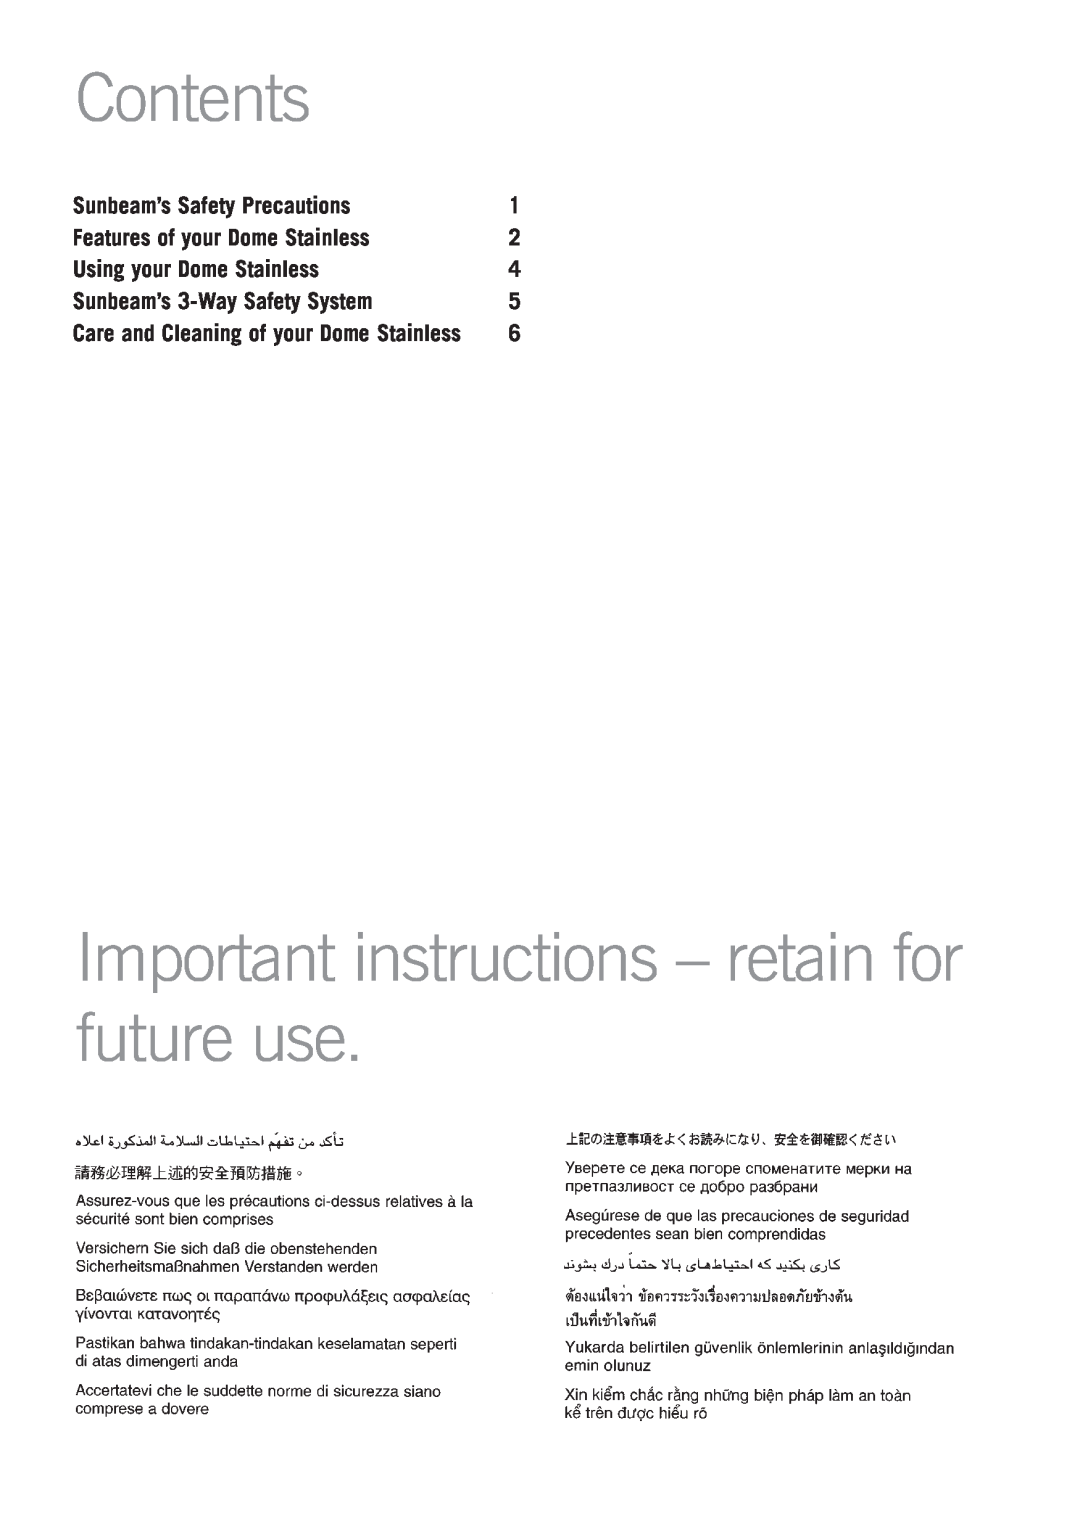 Sunbeam KE7350 manual Contents, Important instructions - retain for future use, Sunbeam’s Safety Precautions 